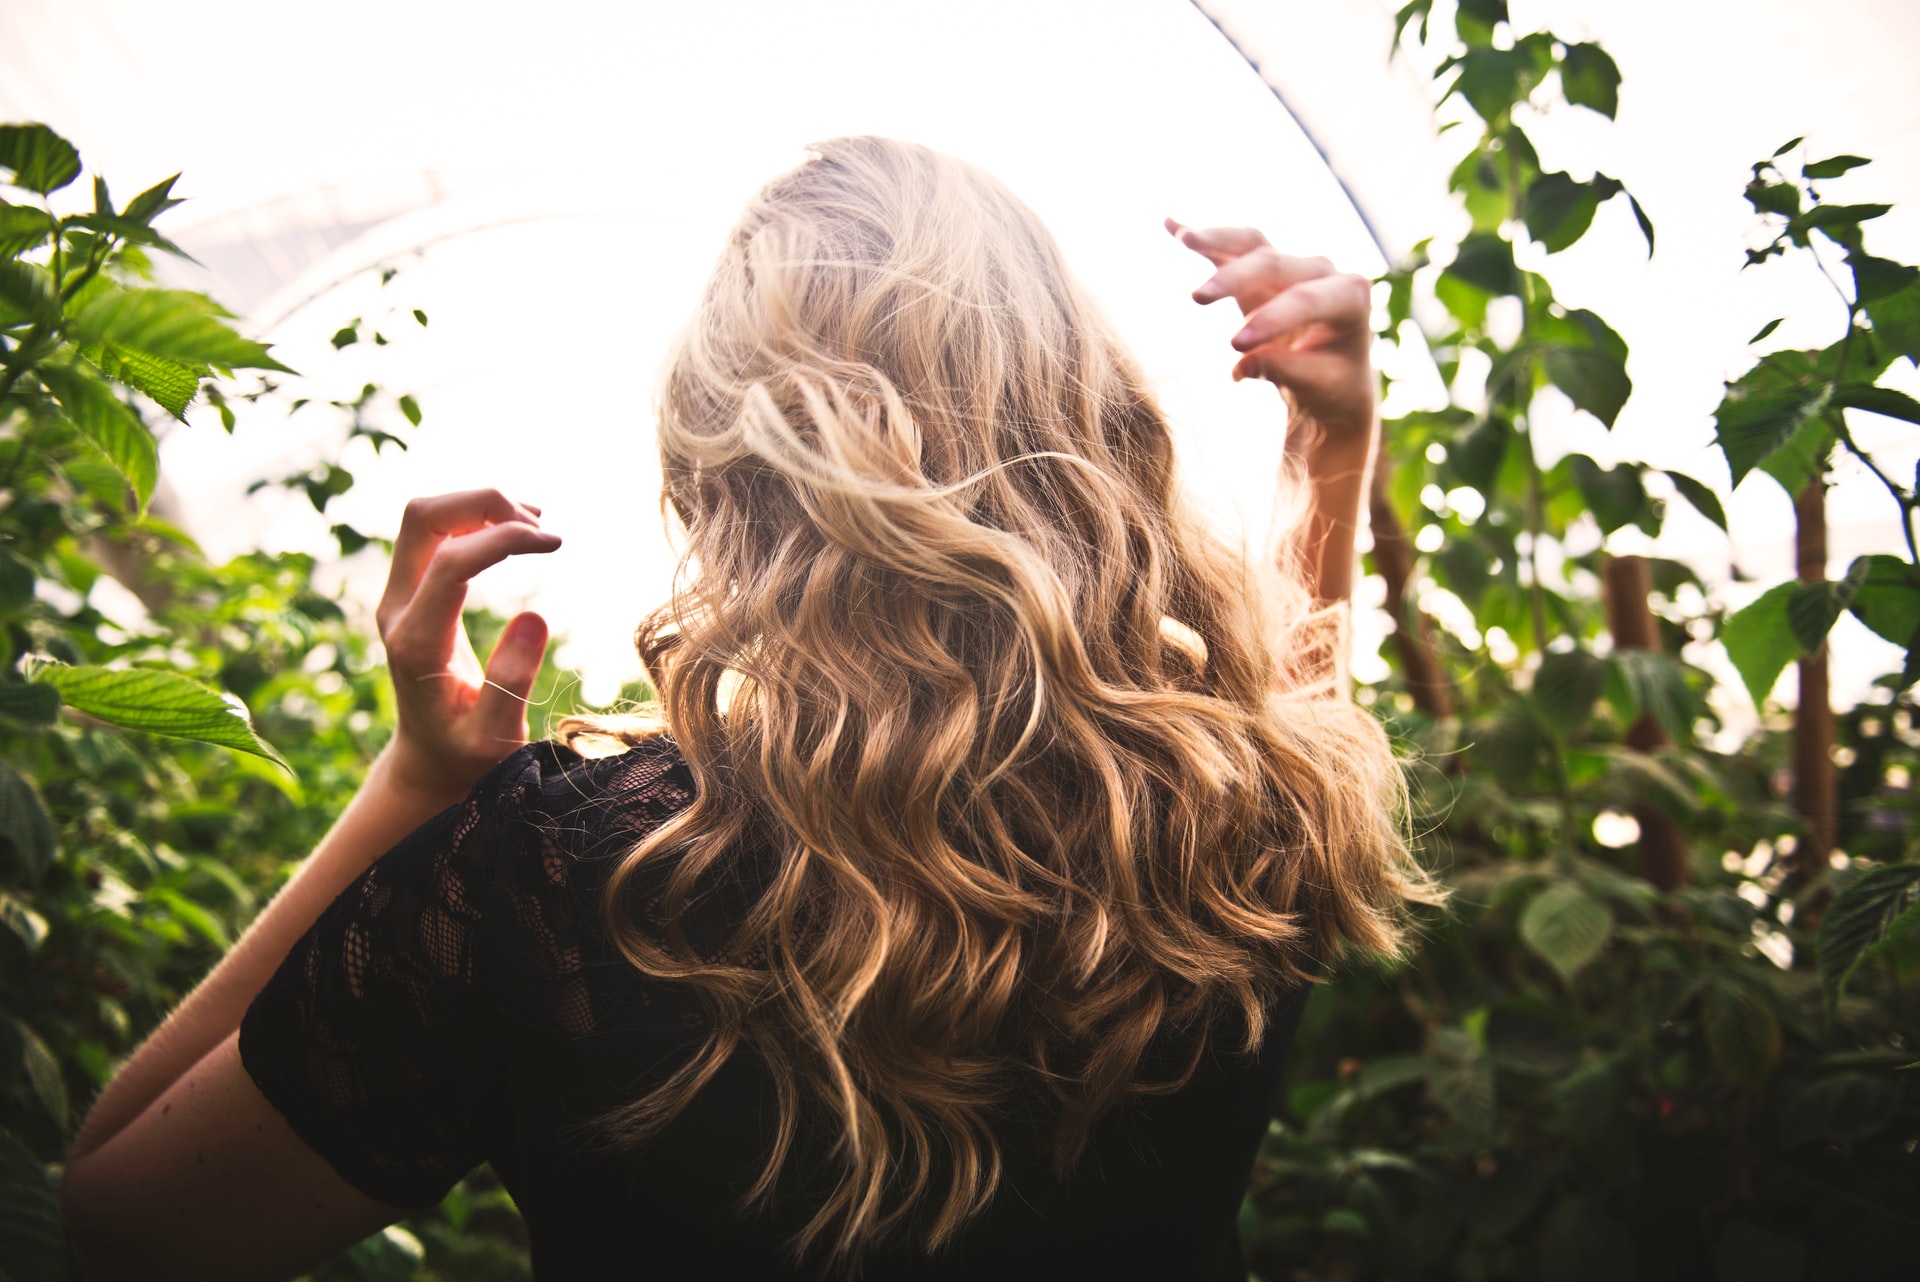 What should you eat and drink to enjoy thick and healthy hair?